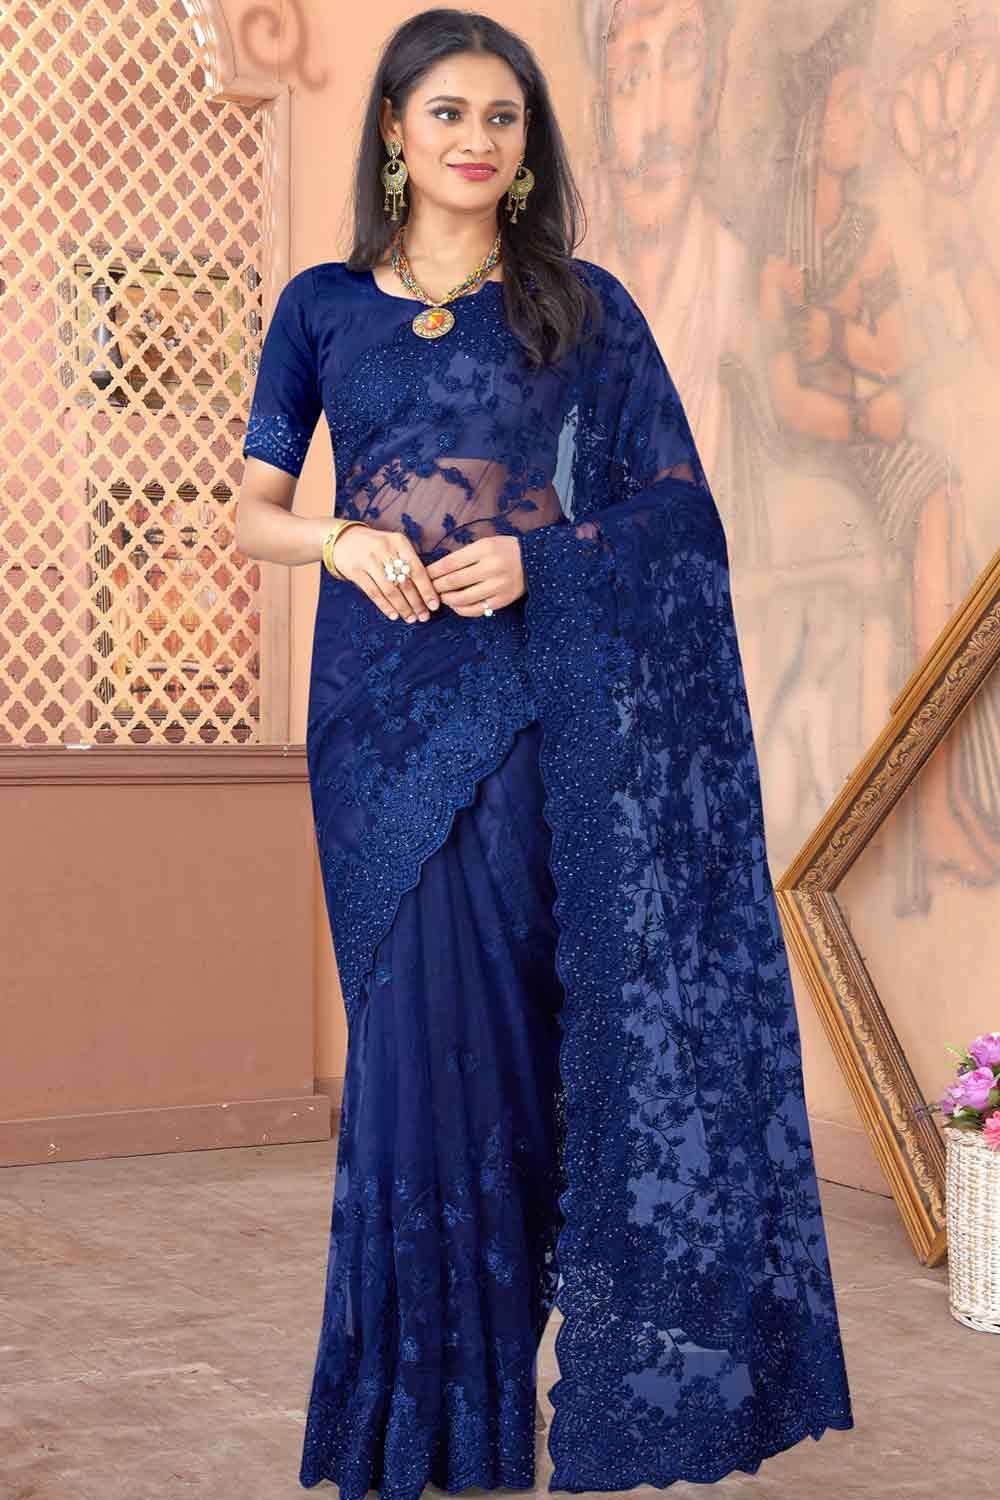 Deep cove blue Saree in Net with Stone with moti - SR18033